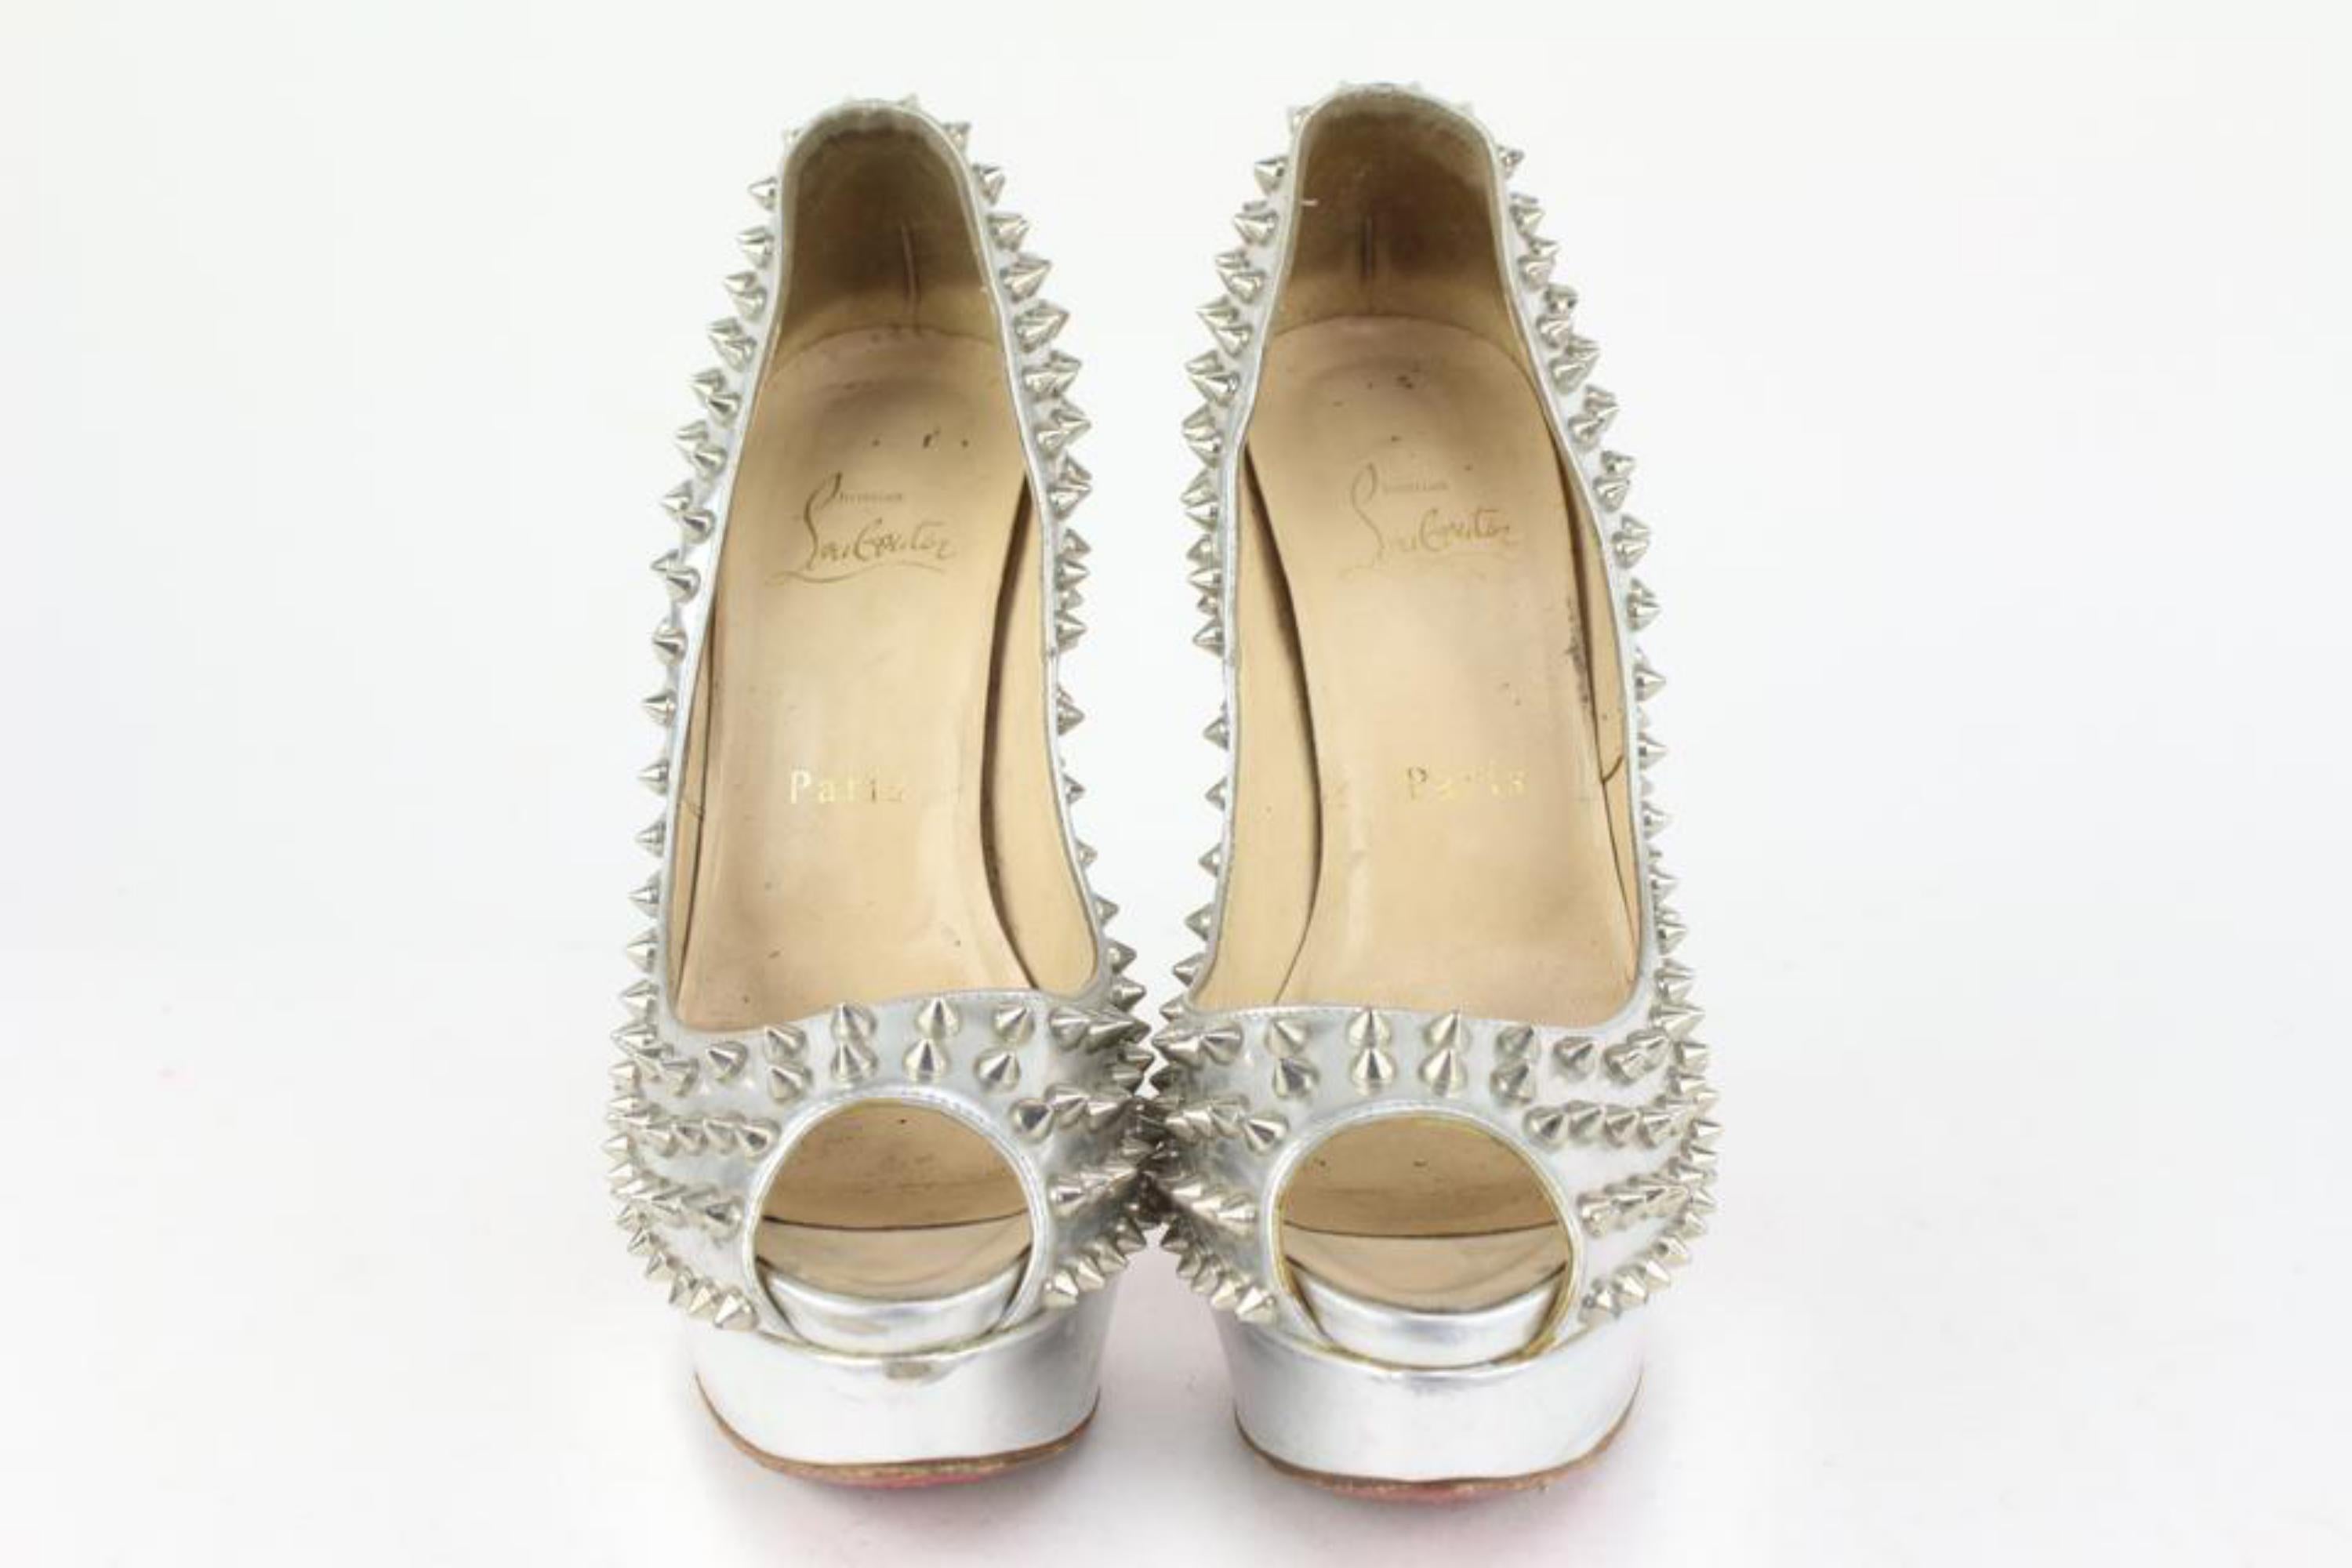 Christian Louboutin Women's 38.5 Silver Spike Lady Peep Open Toe Platforms 1122c In Fair Condition For Sale In Dix hills, NY